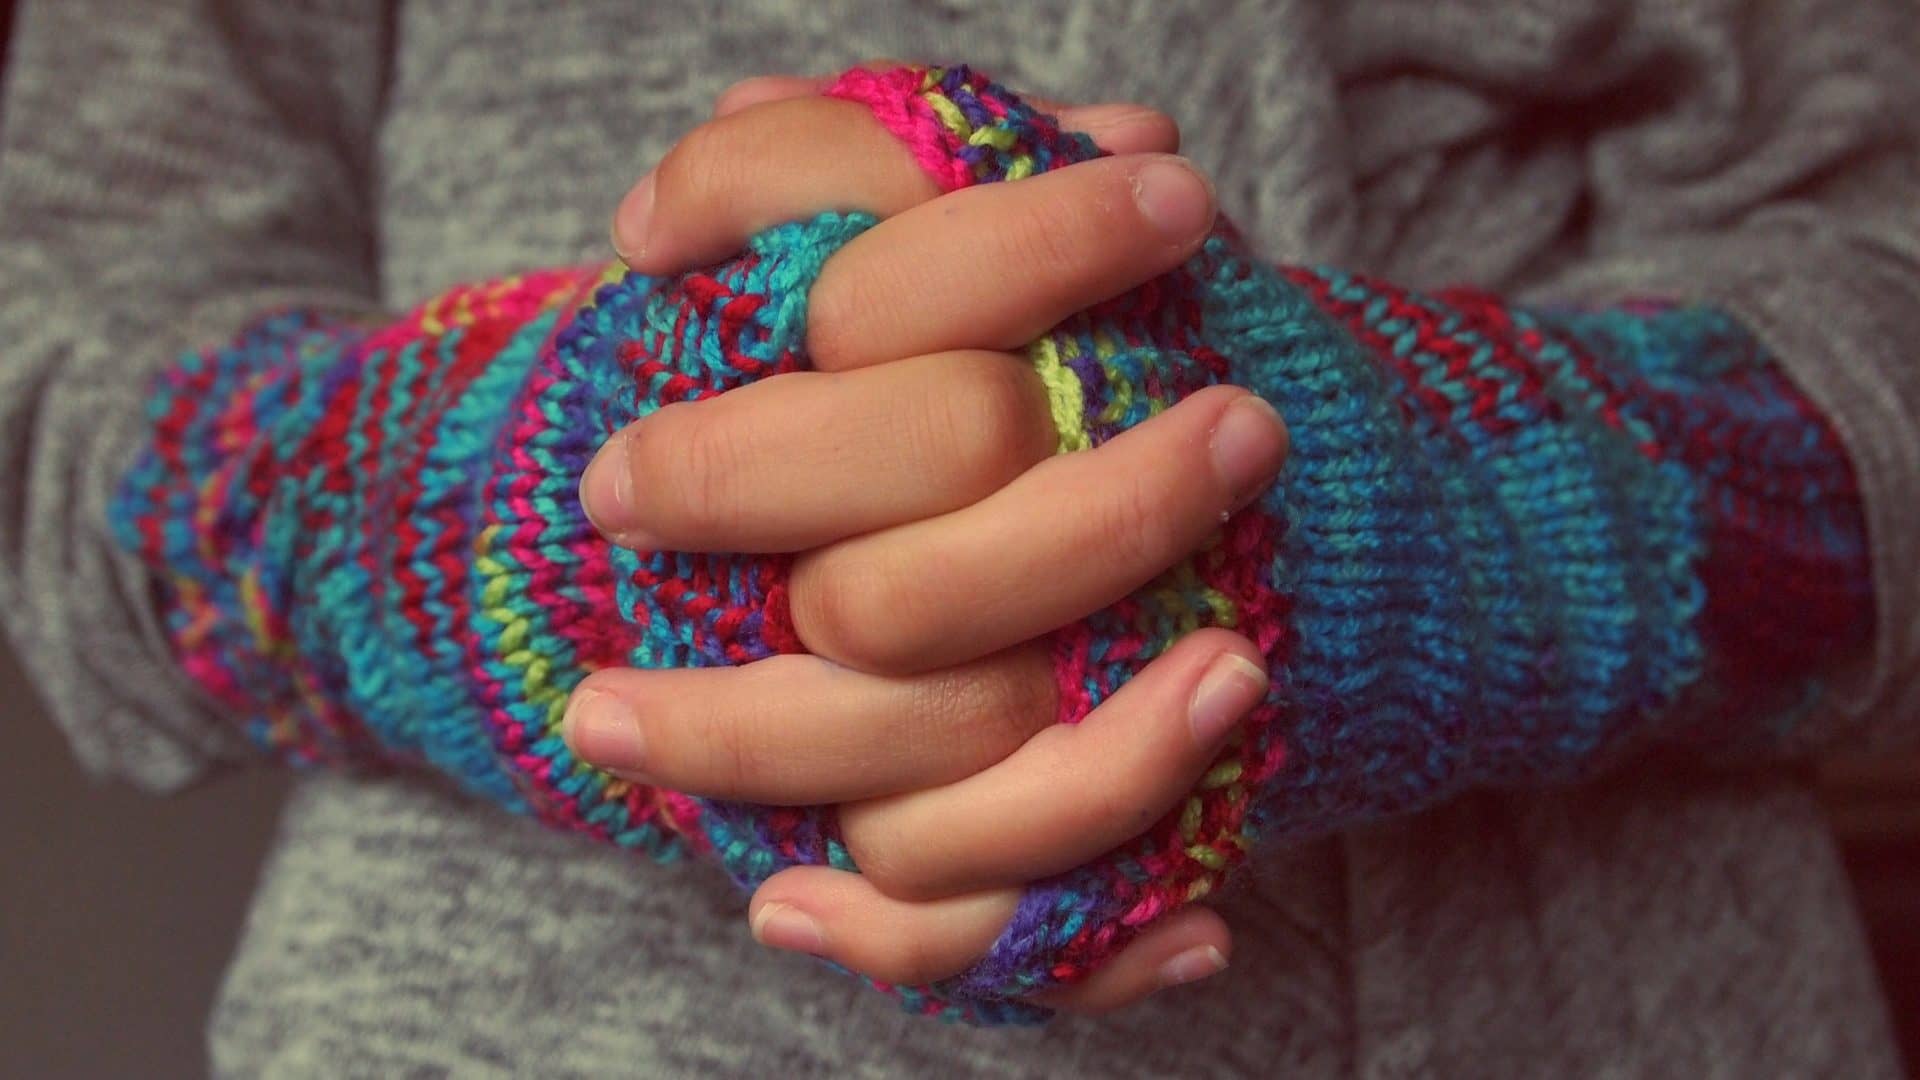 Image: Woven Hands Wearing Knit Gloves